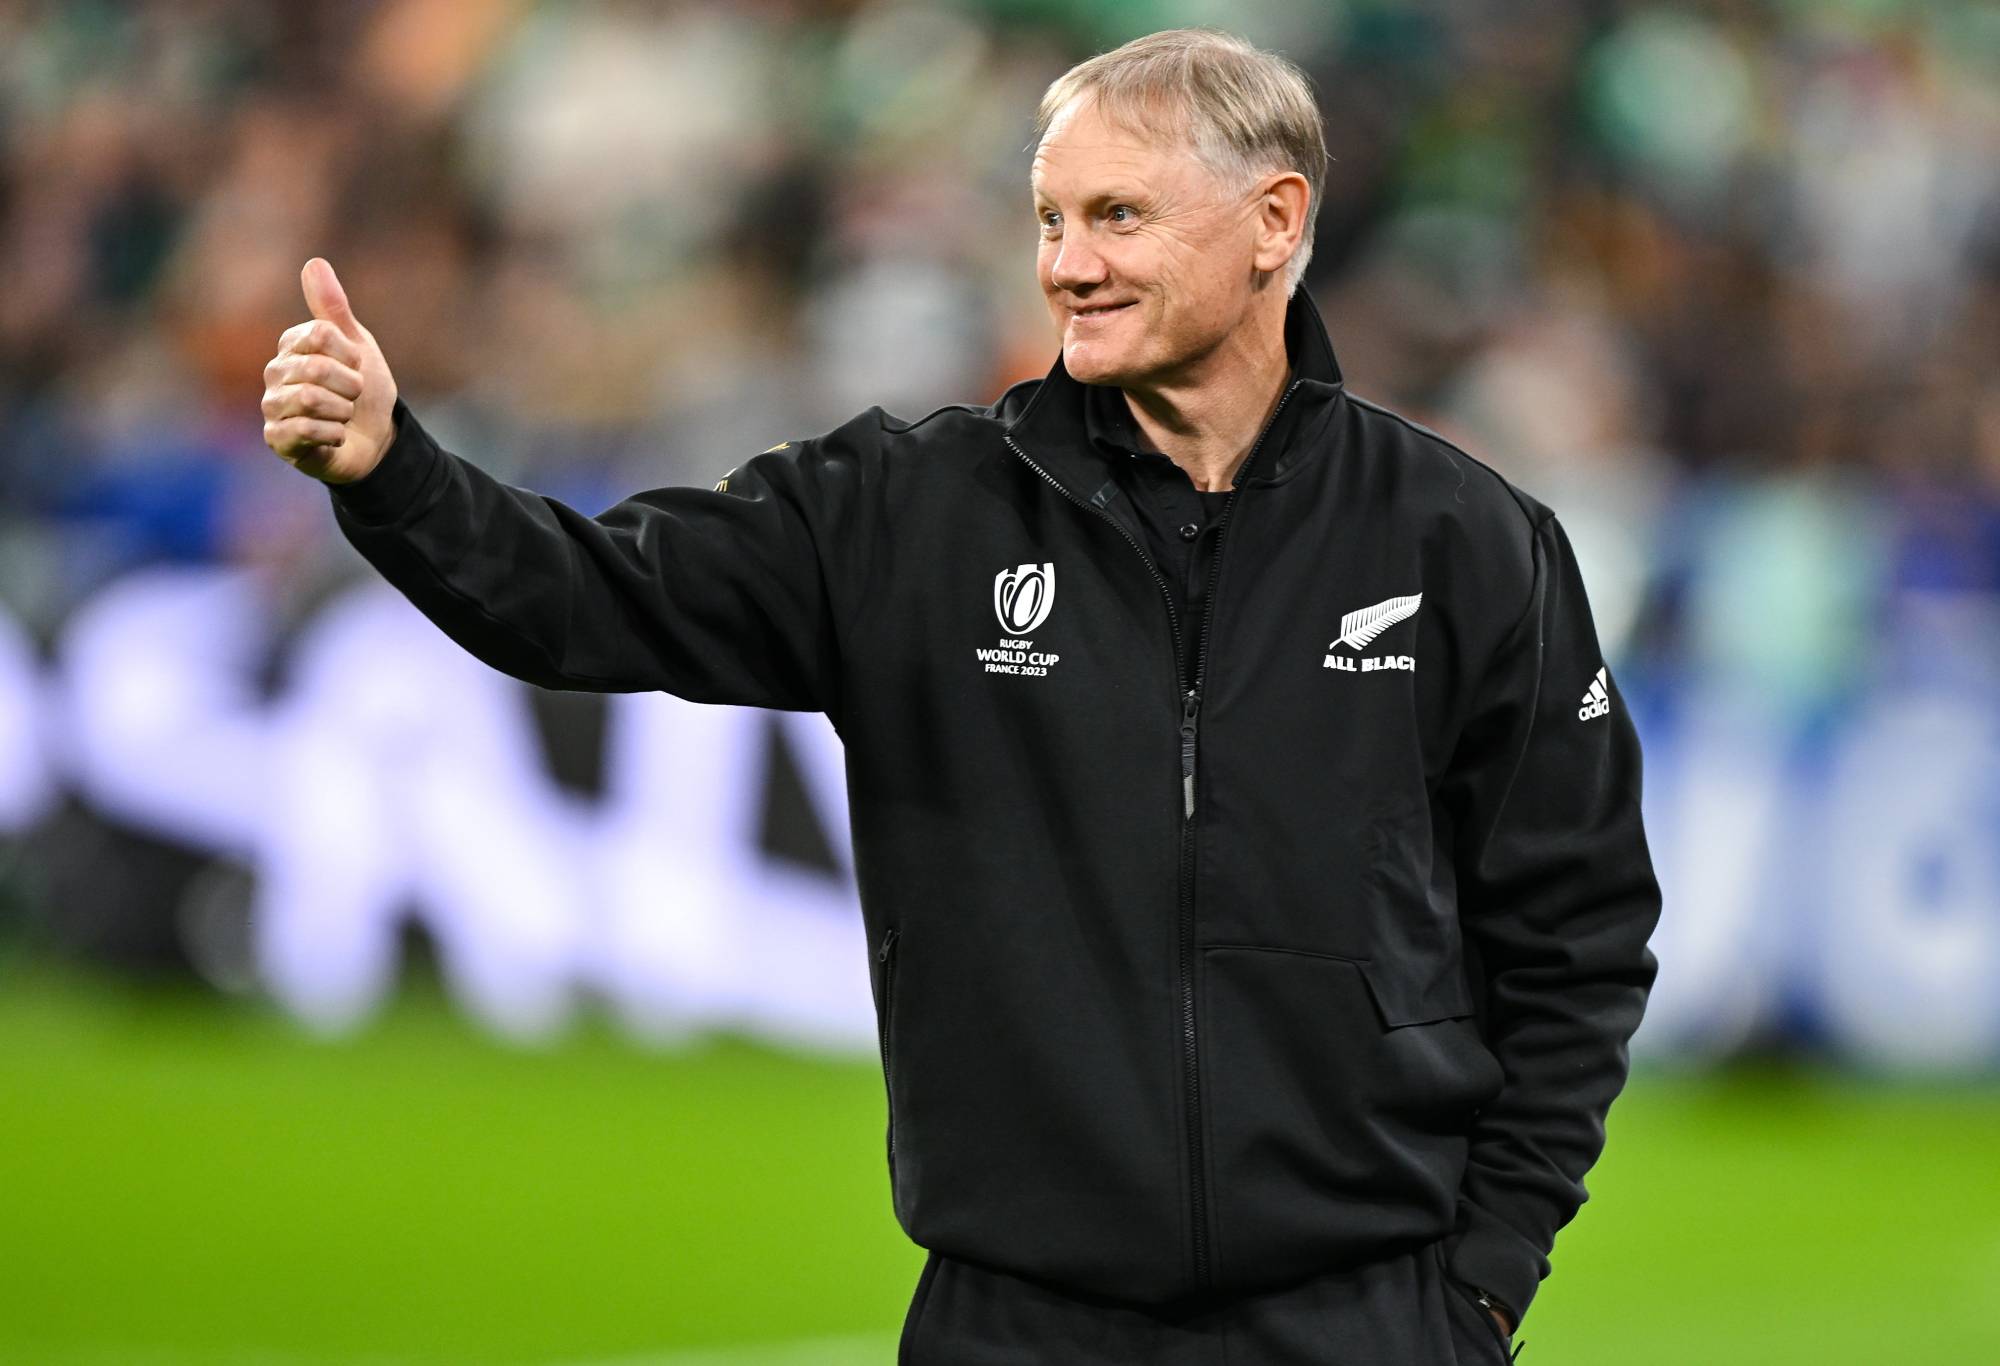 New Zealand assistant coach Joe Schmidt before the 2023 Rugby World Cup quarter-final match between Ireland and New Zealand at the Stade de France in Paris, France. (Photo By Brendan Moran/Sportsfile via Getty Images)